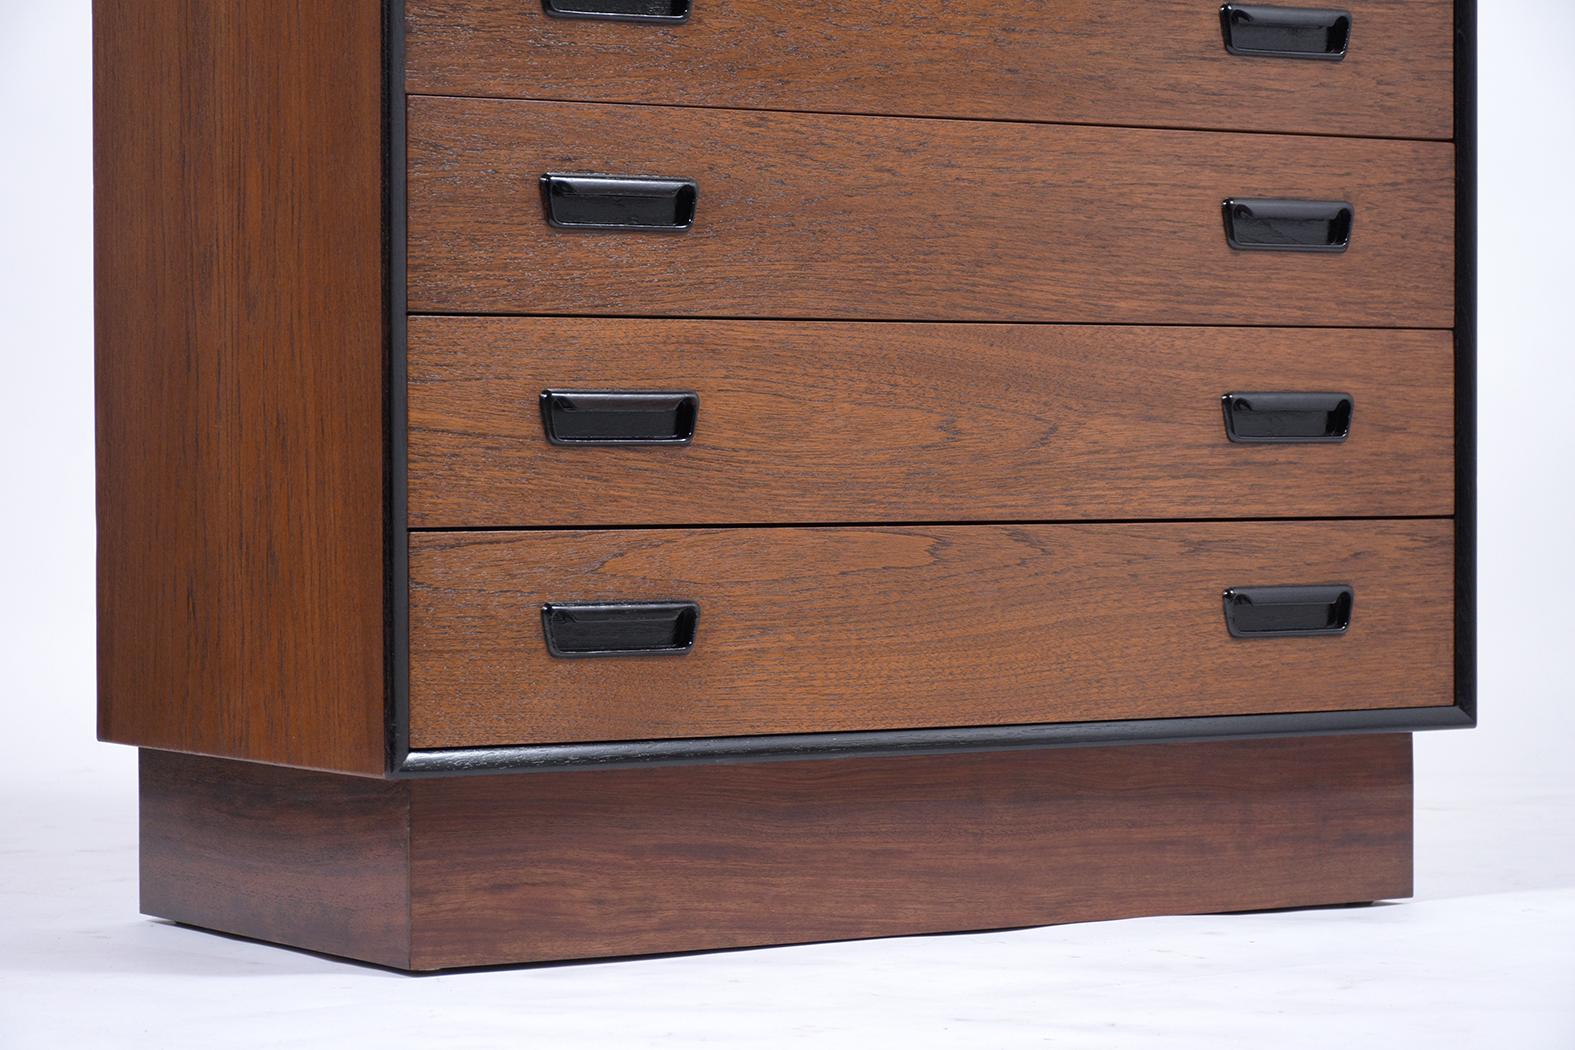 1960s Mid-Century Modern Danish Teak Wood Chest of Drawers with Ebonized Accents 2